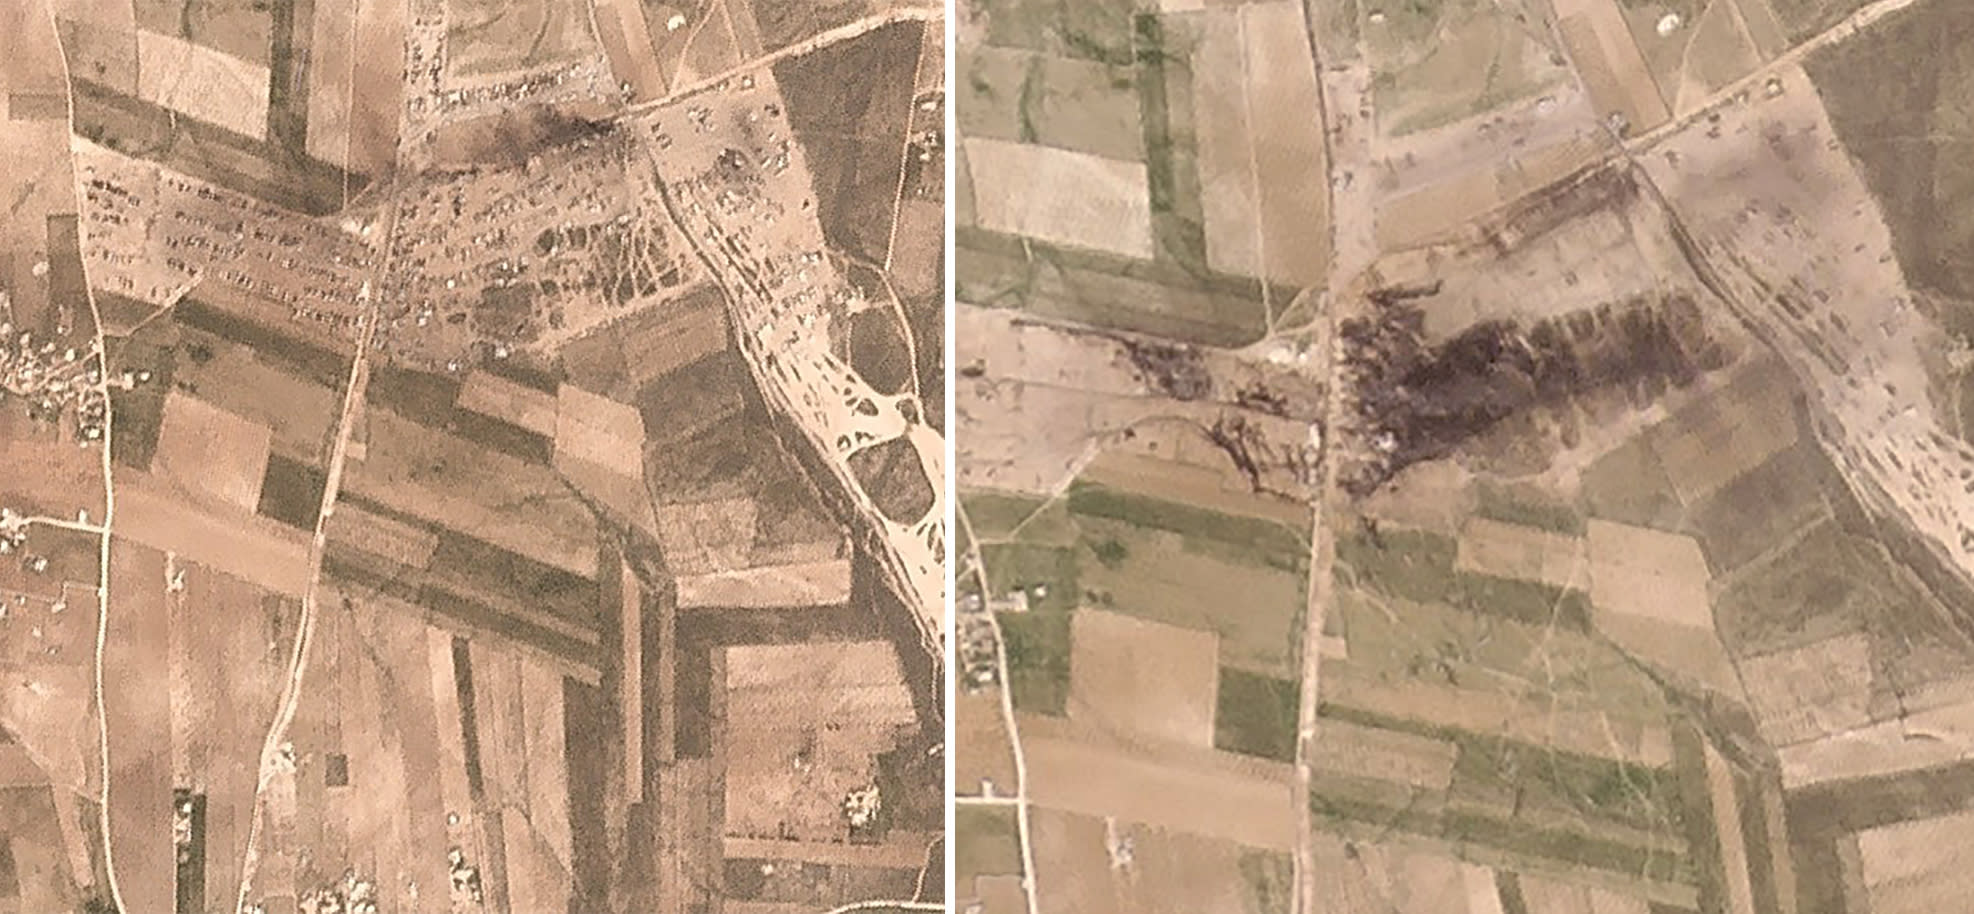 Satellite photos show the consequences of an attack in northern Syria